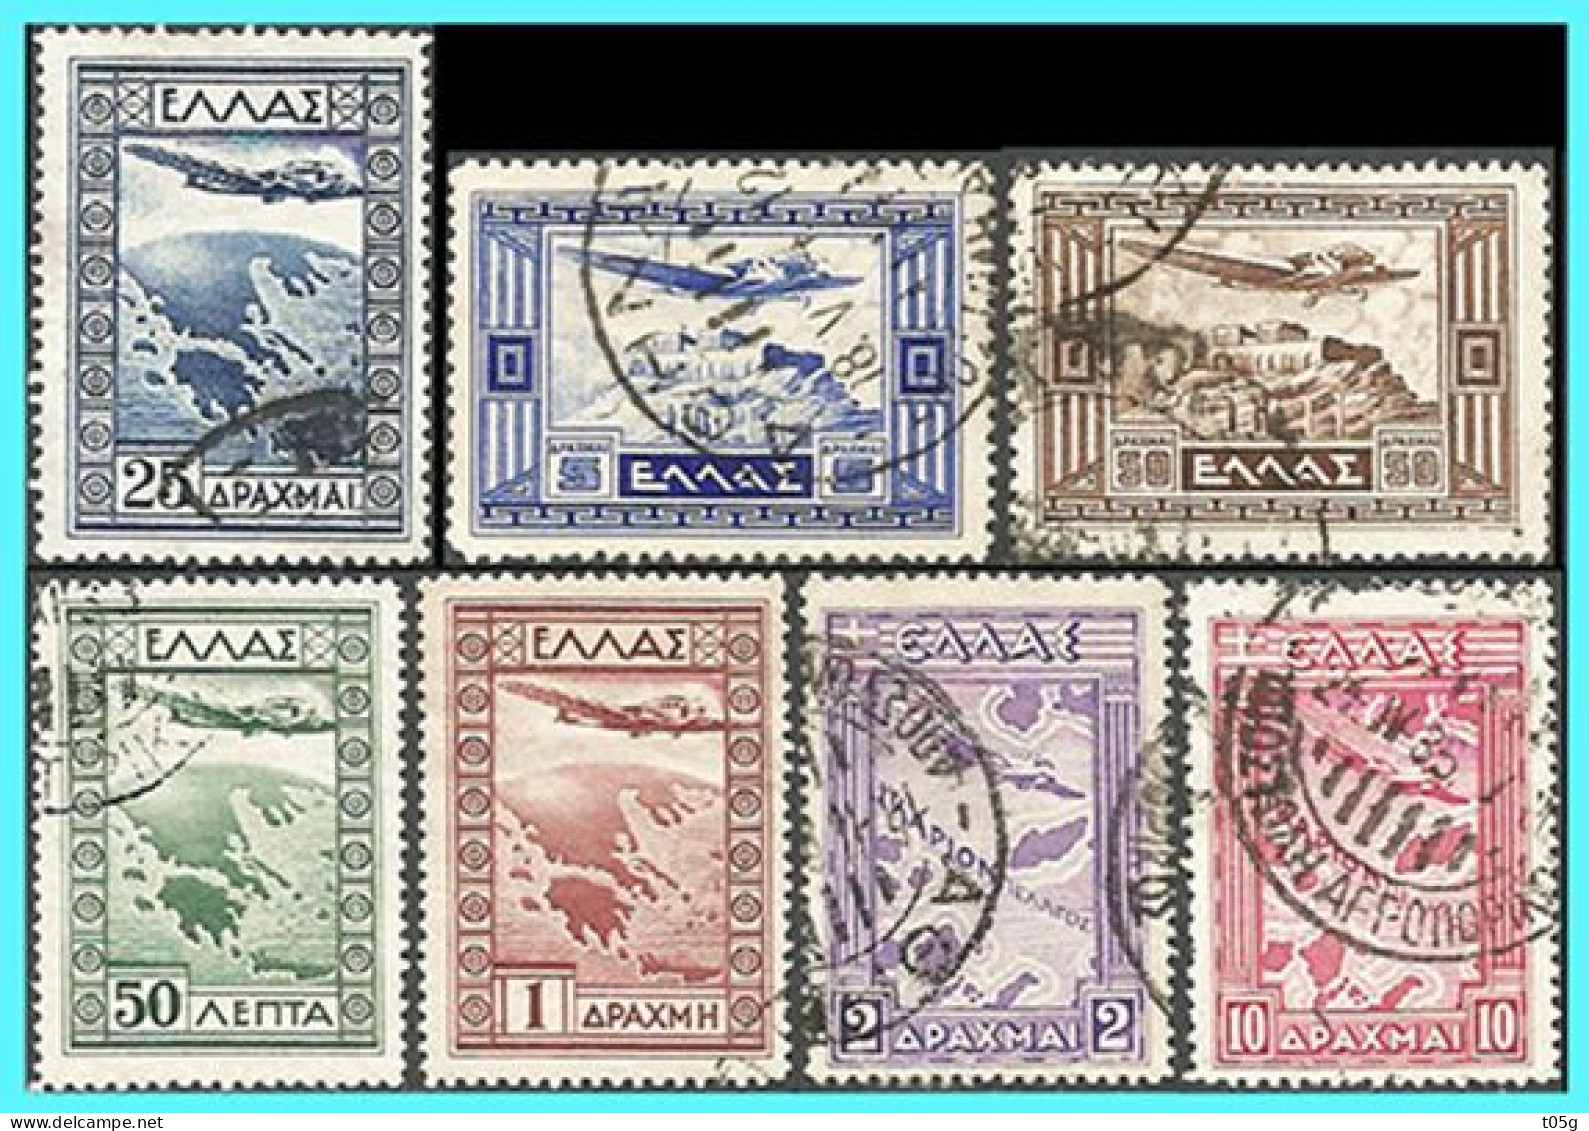 GREECE- GRECE- HELLAS Airpost 1933: “Government” Compl. Set Used - Oblitérés